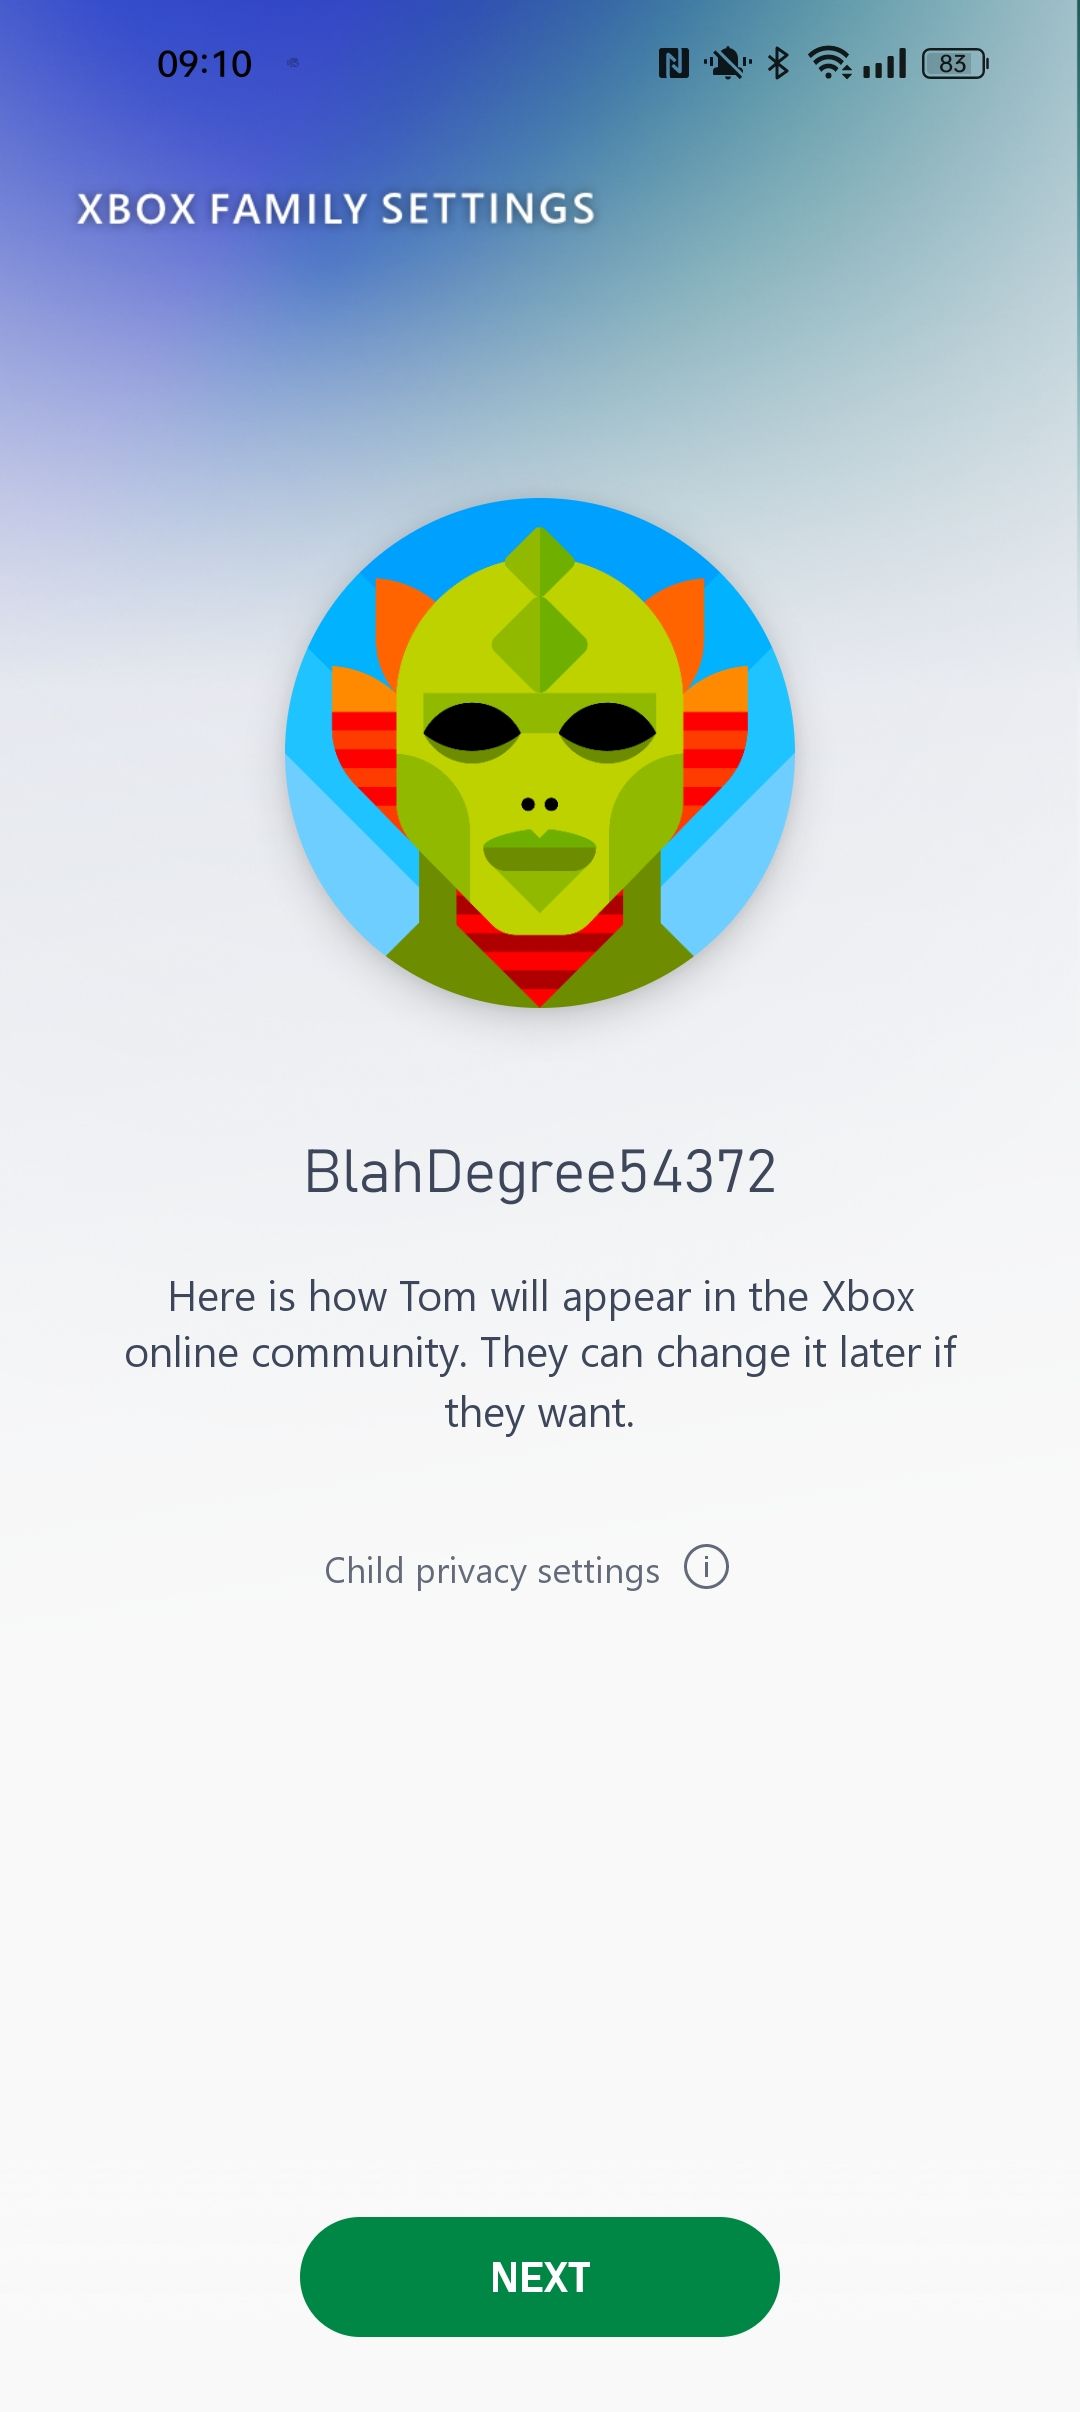 A screenshot of the Xbox Family Settings app highlighting the addition of a new family member profile